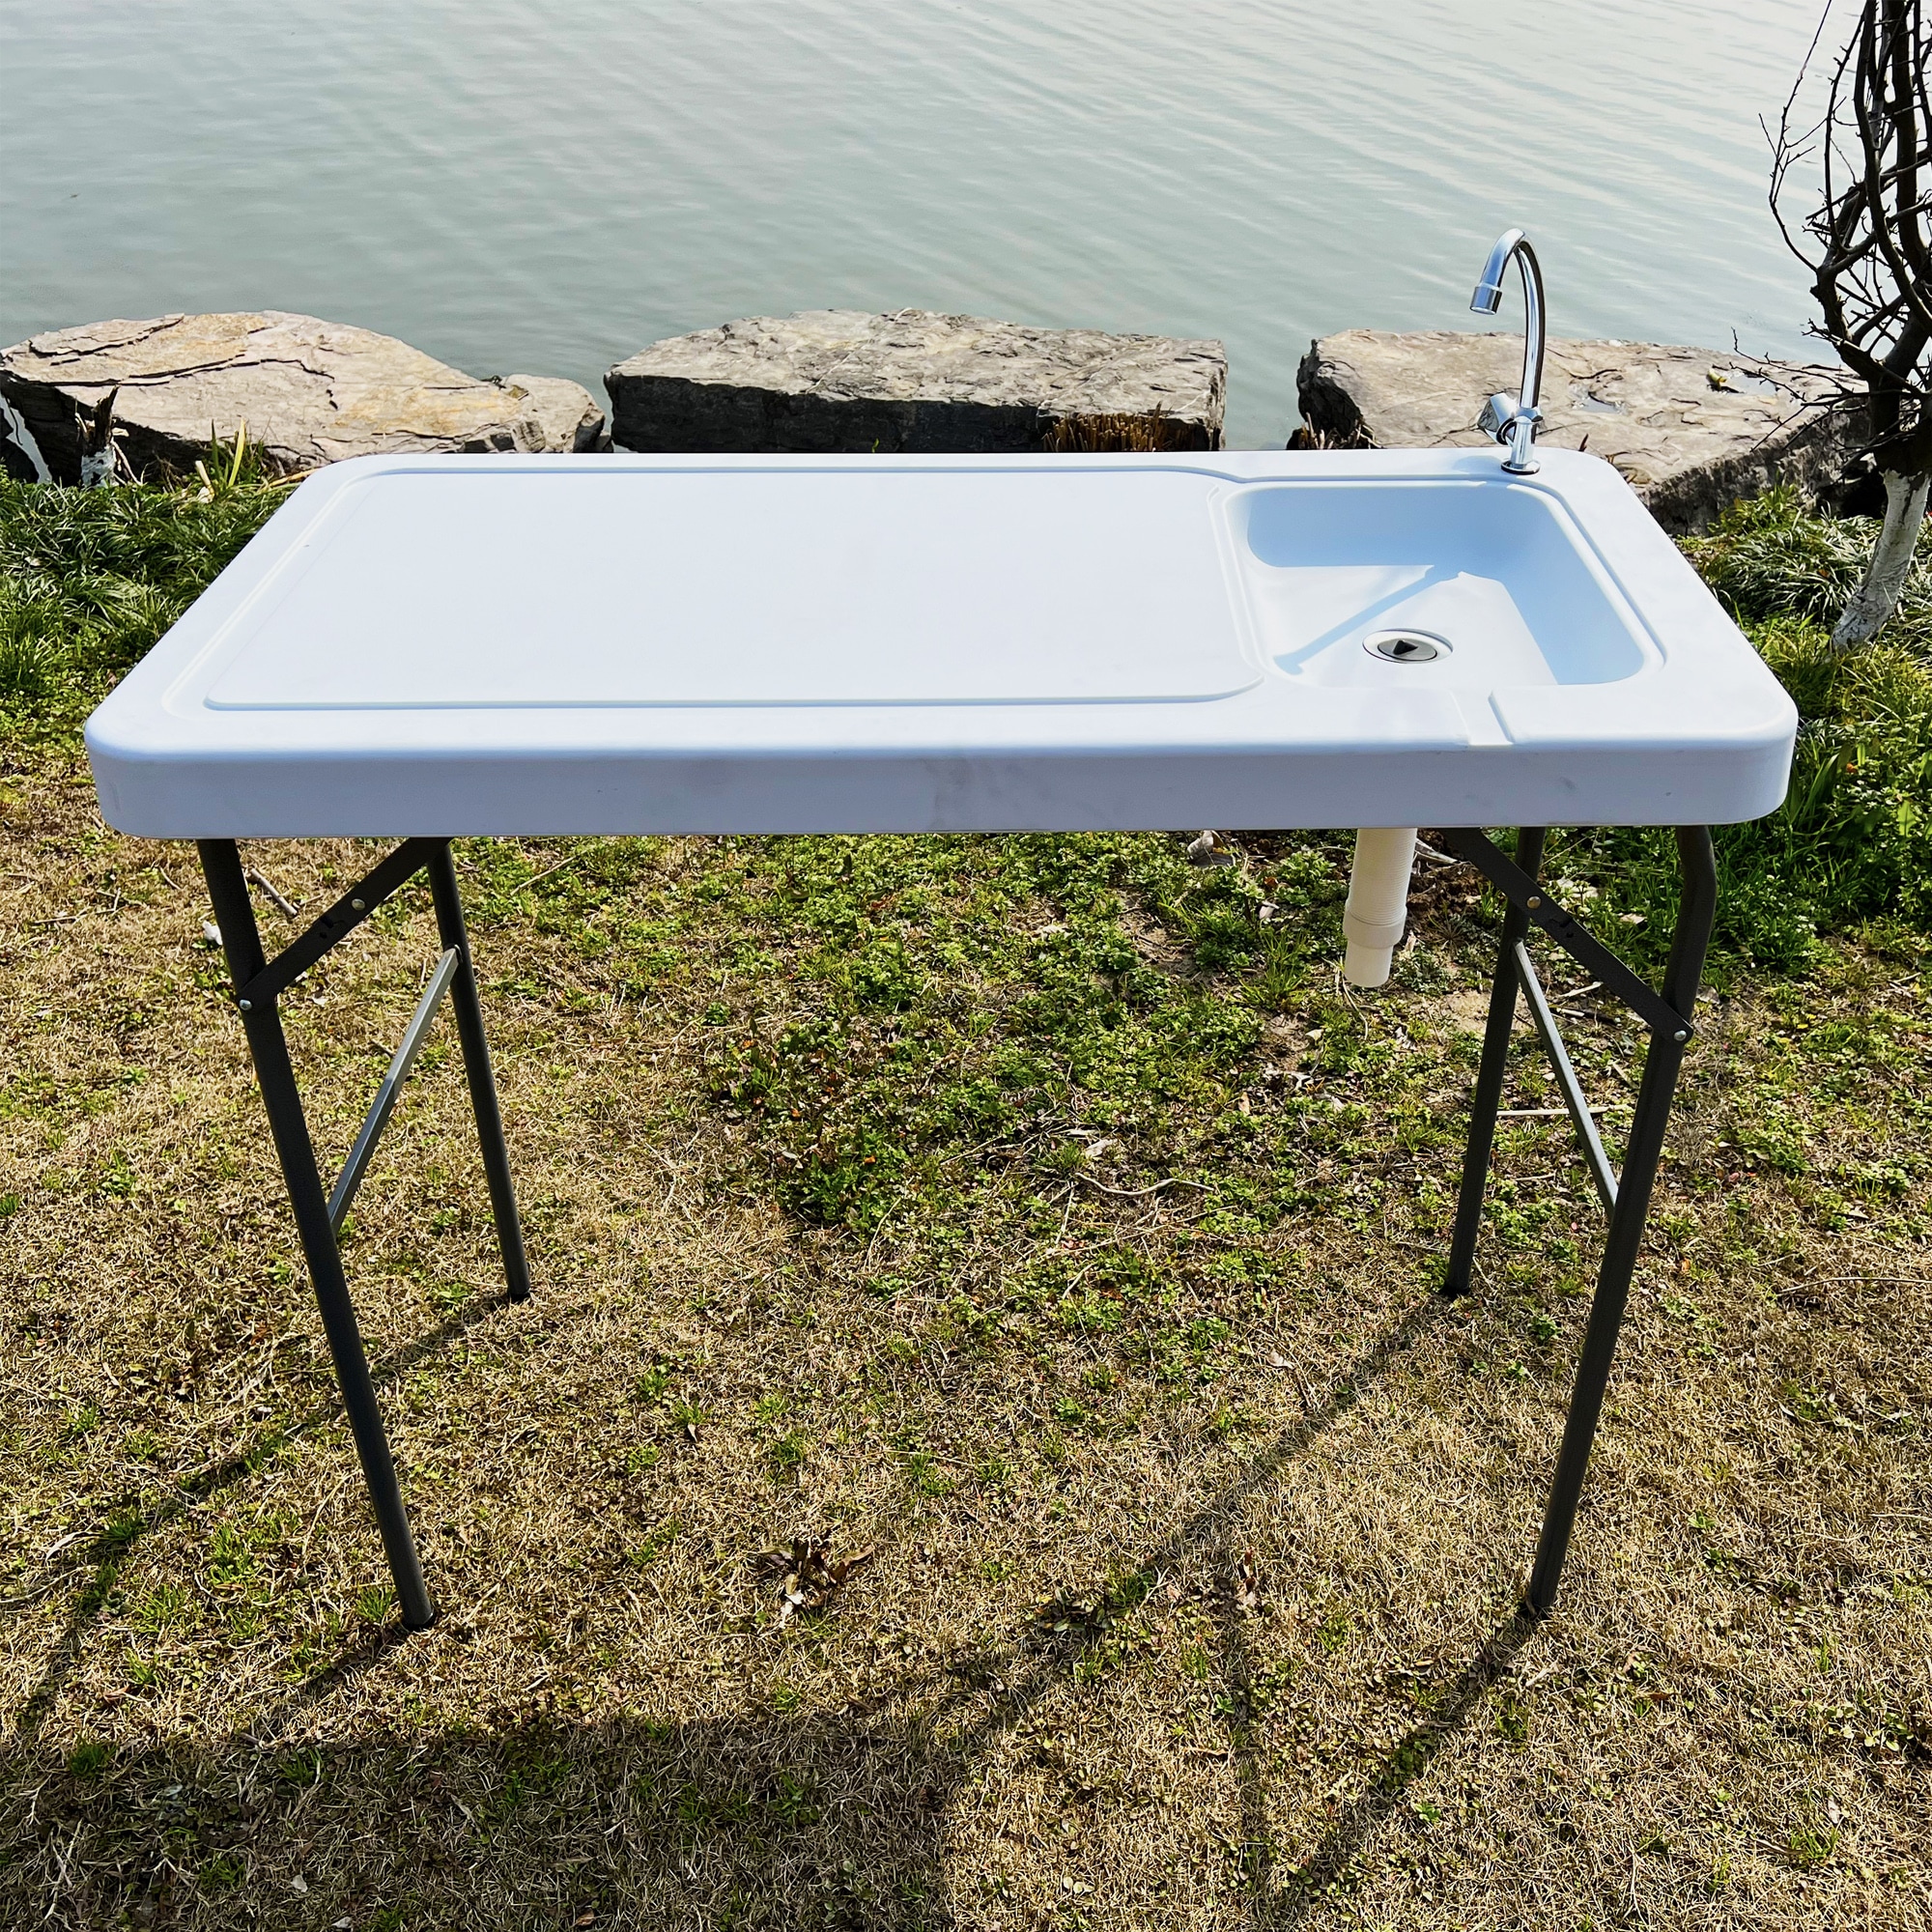 Gaierptone Folding Camping Table Outdoor Picnic Table Portable Fish  Cleaning Table with Sink and Faucet in the Picnic Tables department at